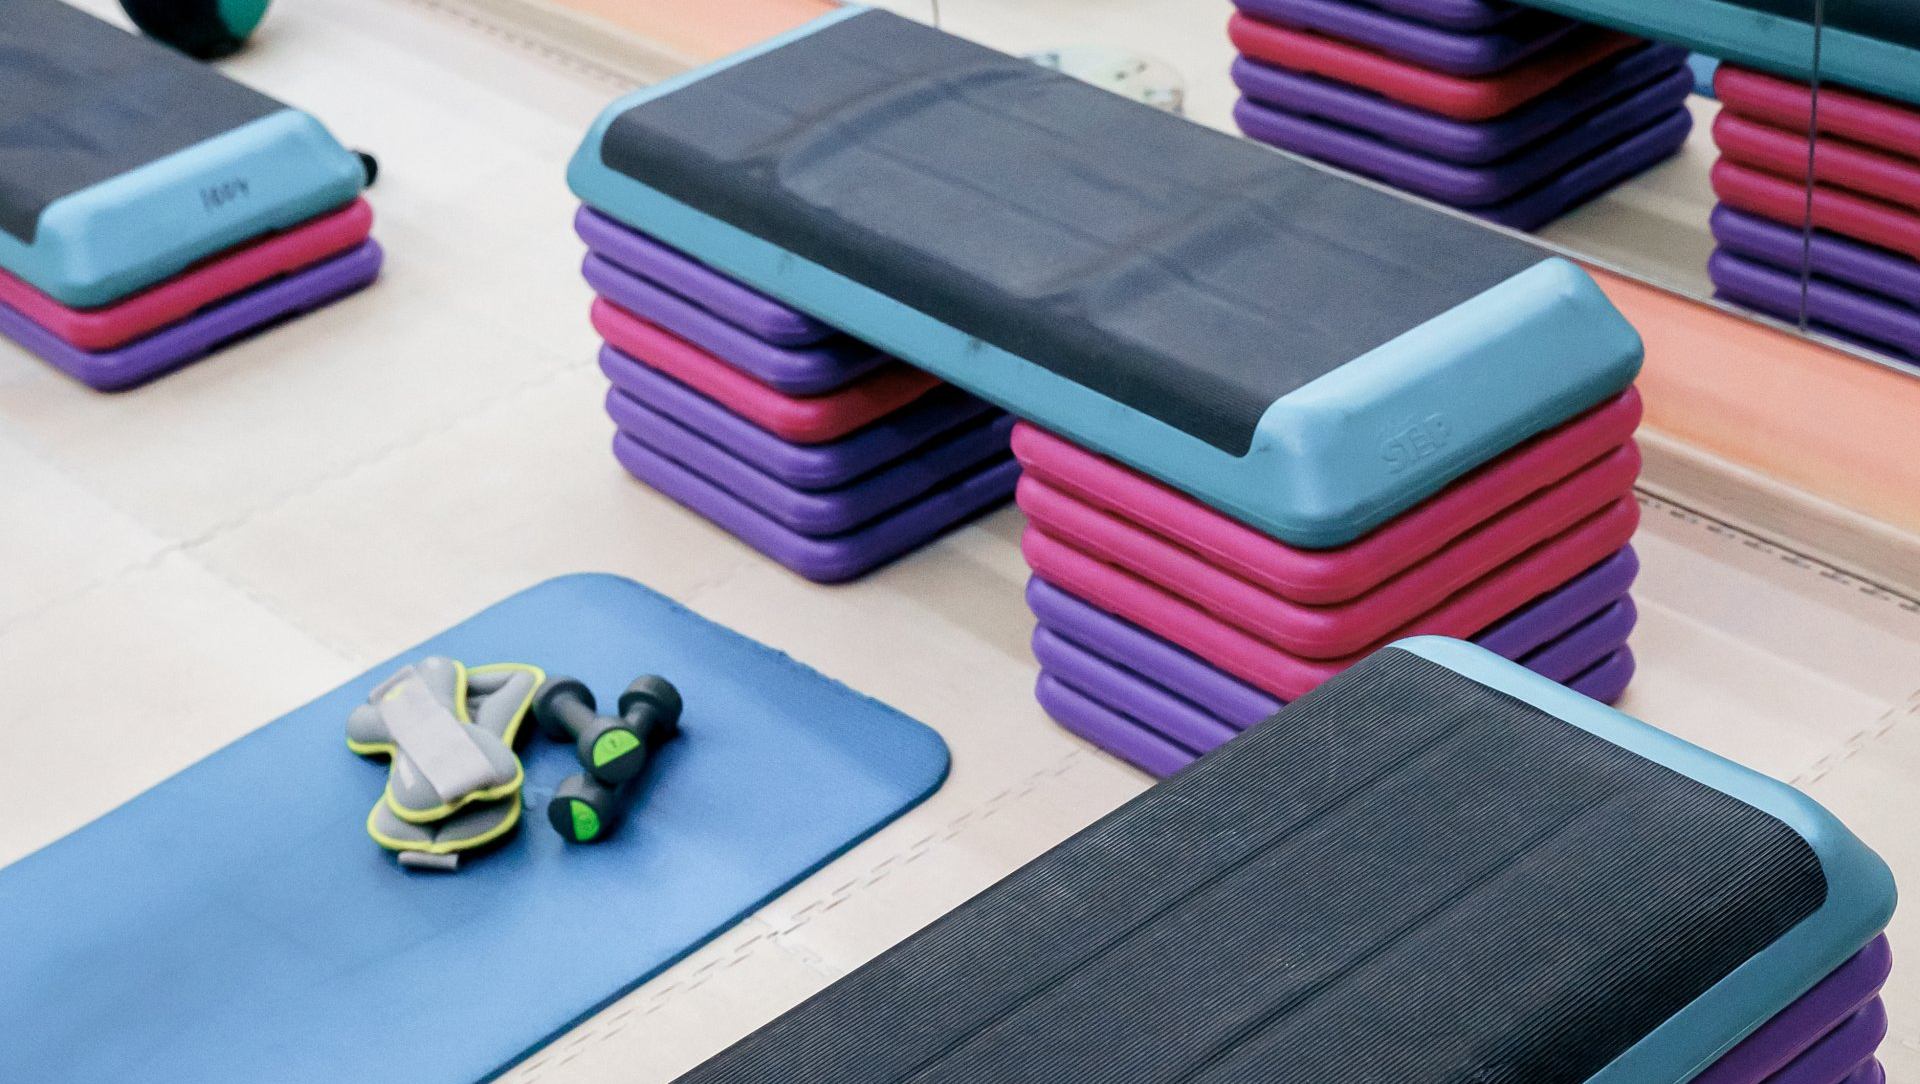 Step exercise equipment along with a mat and weights on the floor.